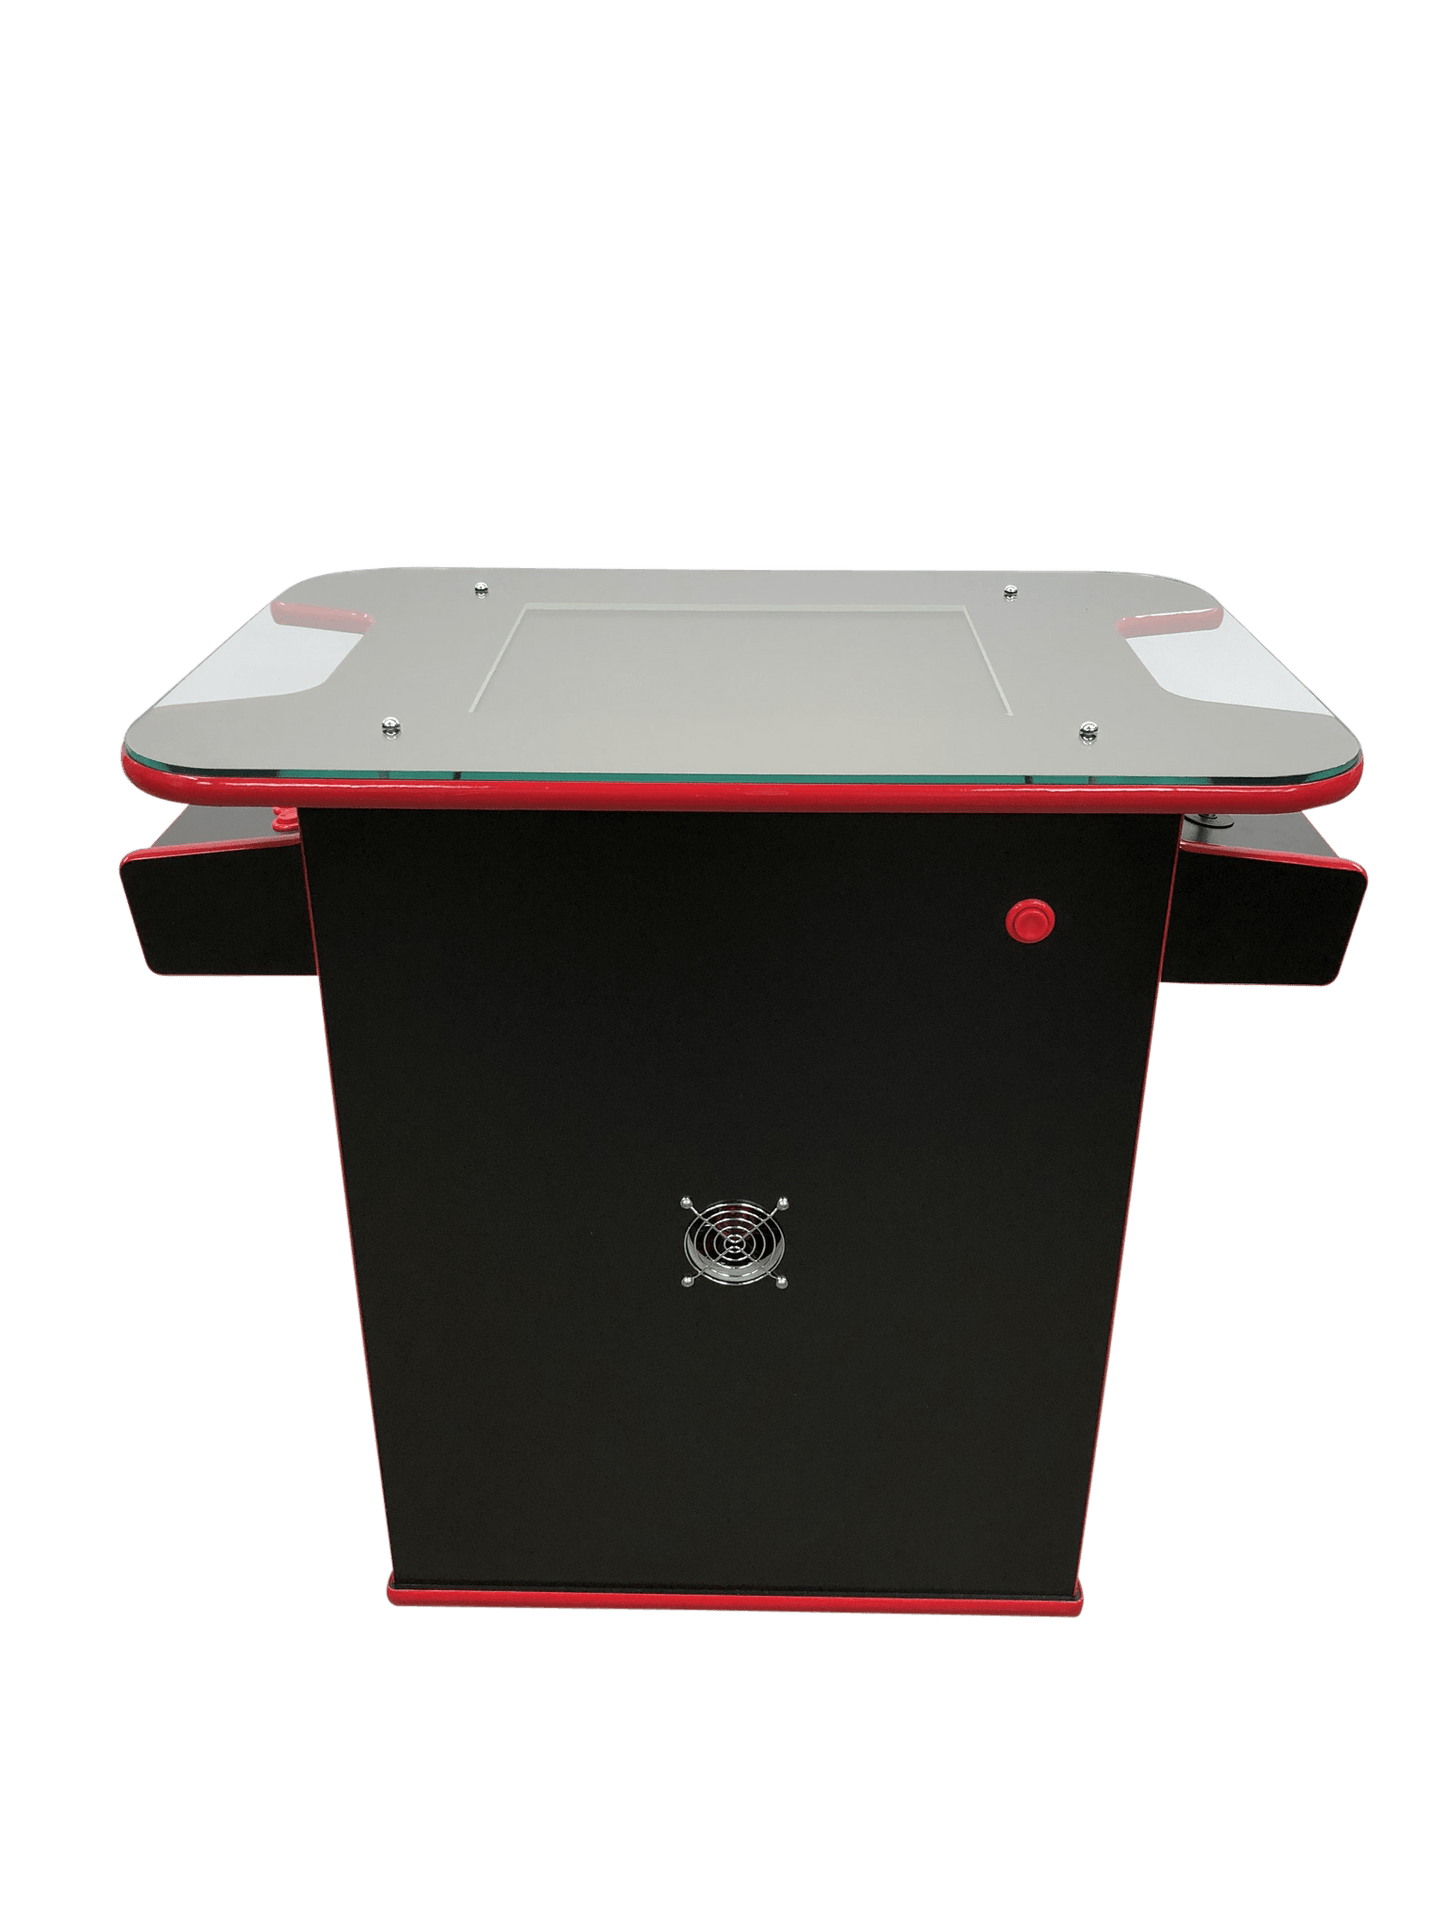 Classic Red and Black Arcade Cocktail Table - Flatout Arcades